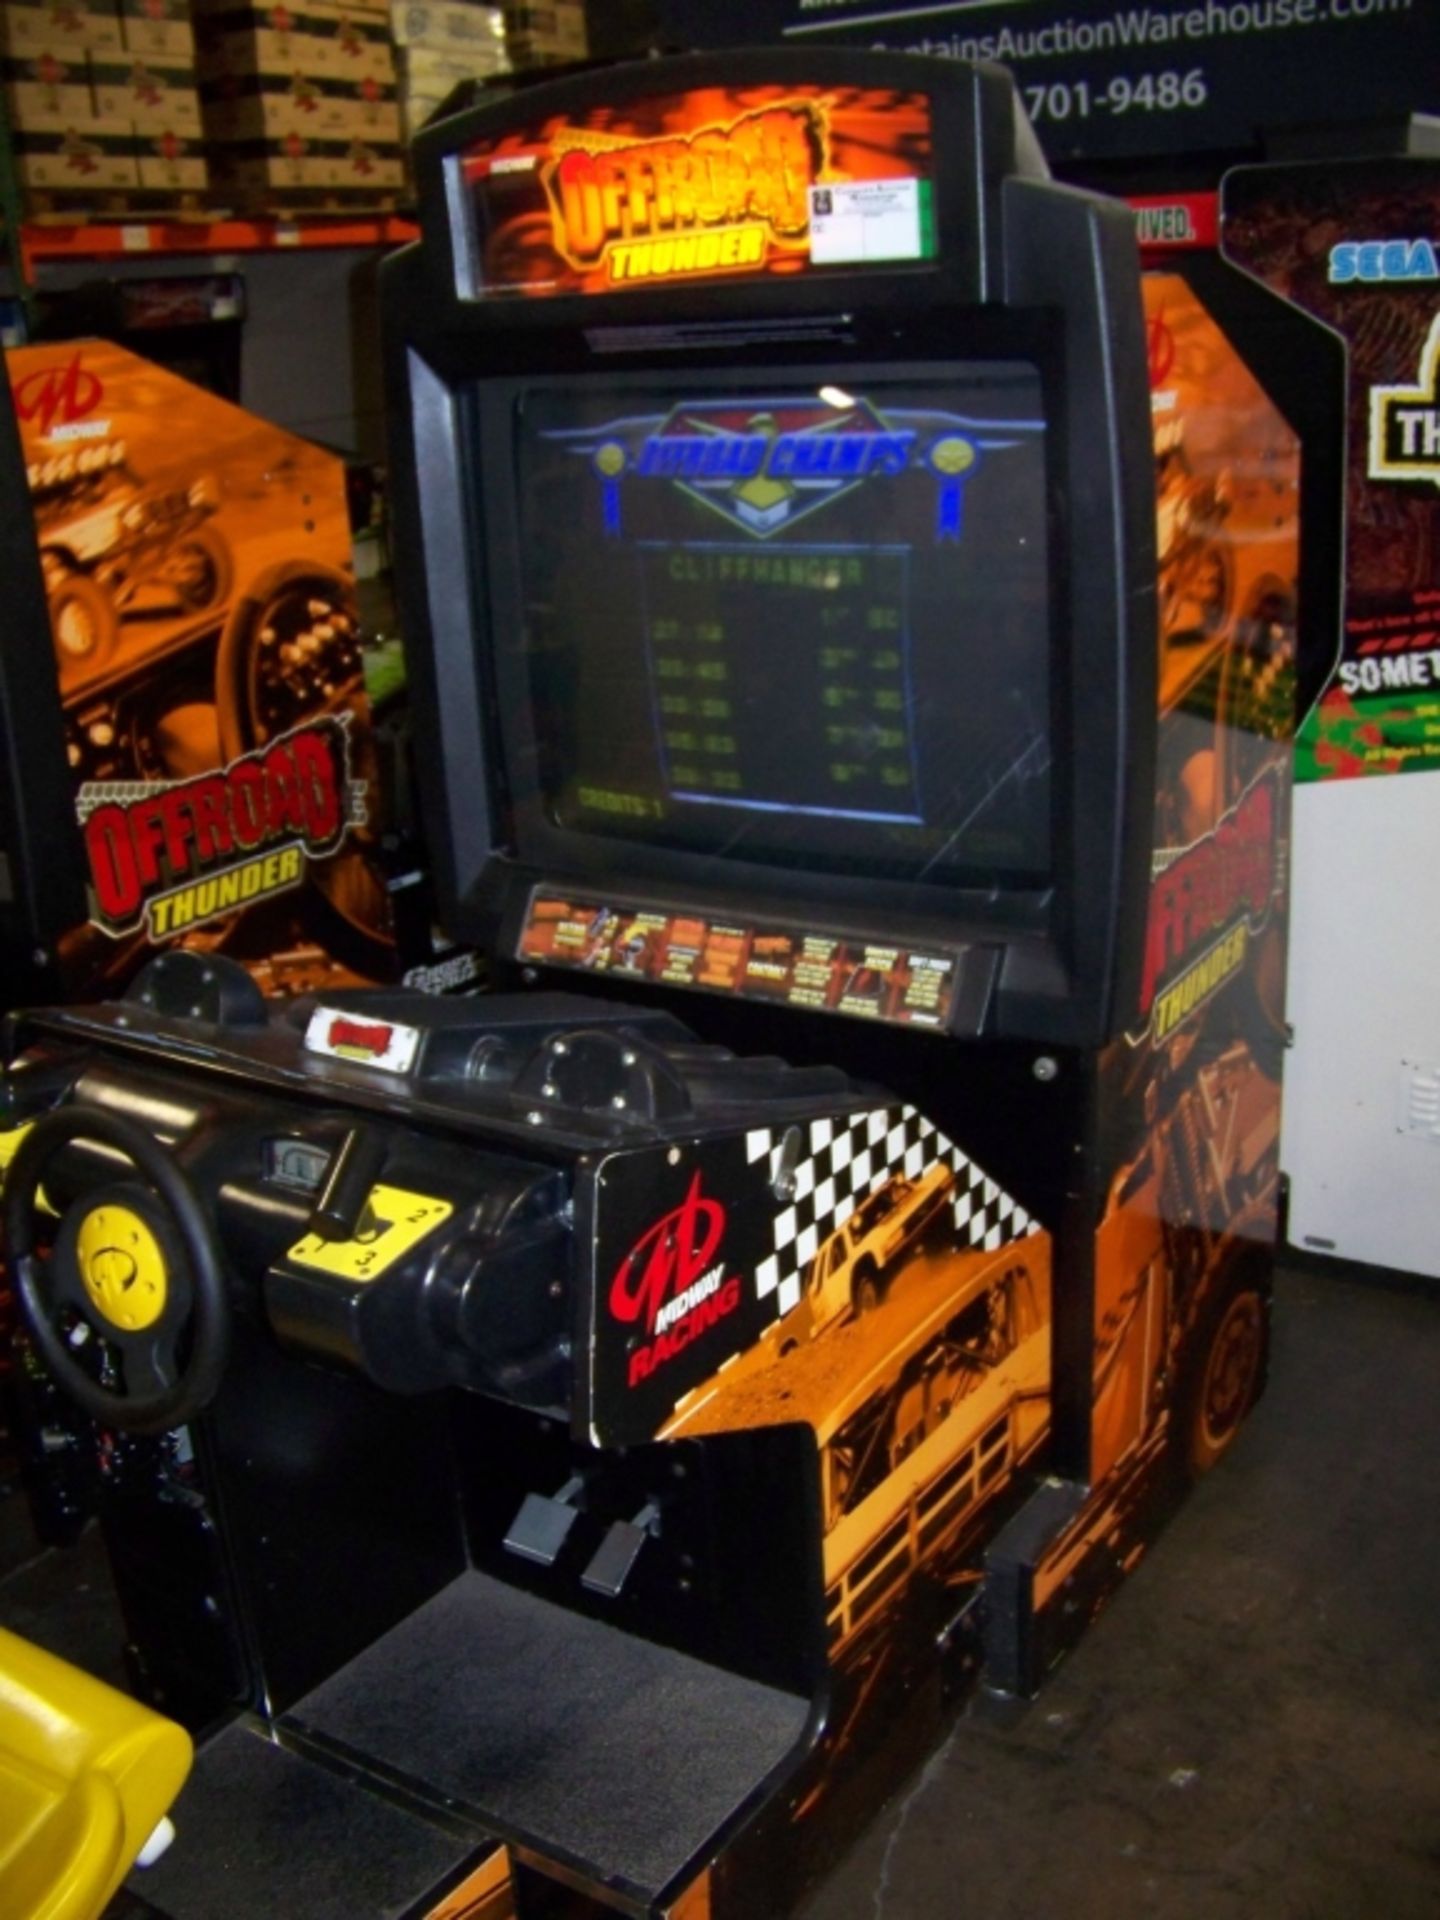 OFFROAD THUNDER 39" DELUXE RACING ARCADE GAME - Image 3 of 3